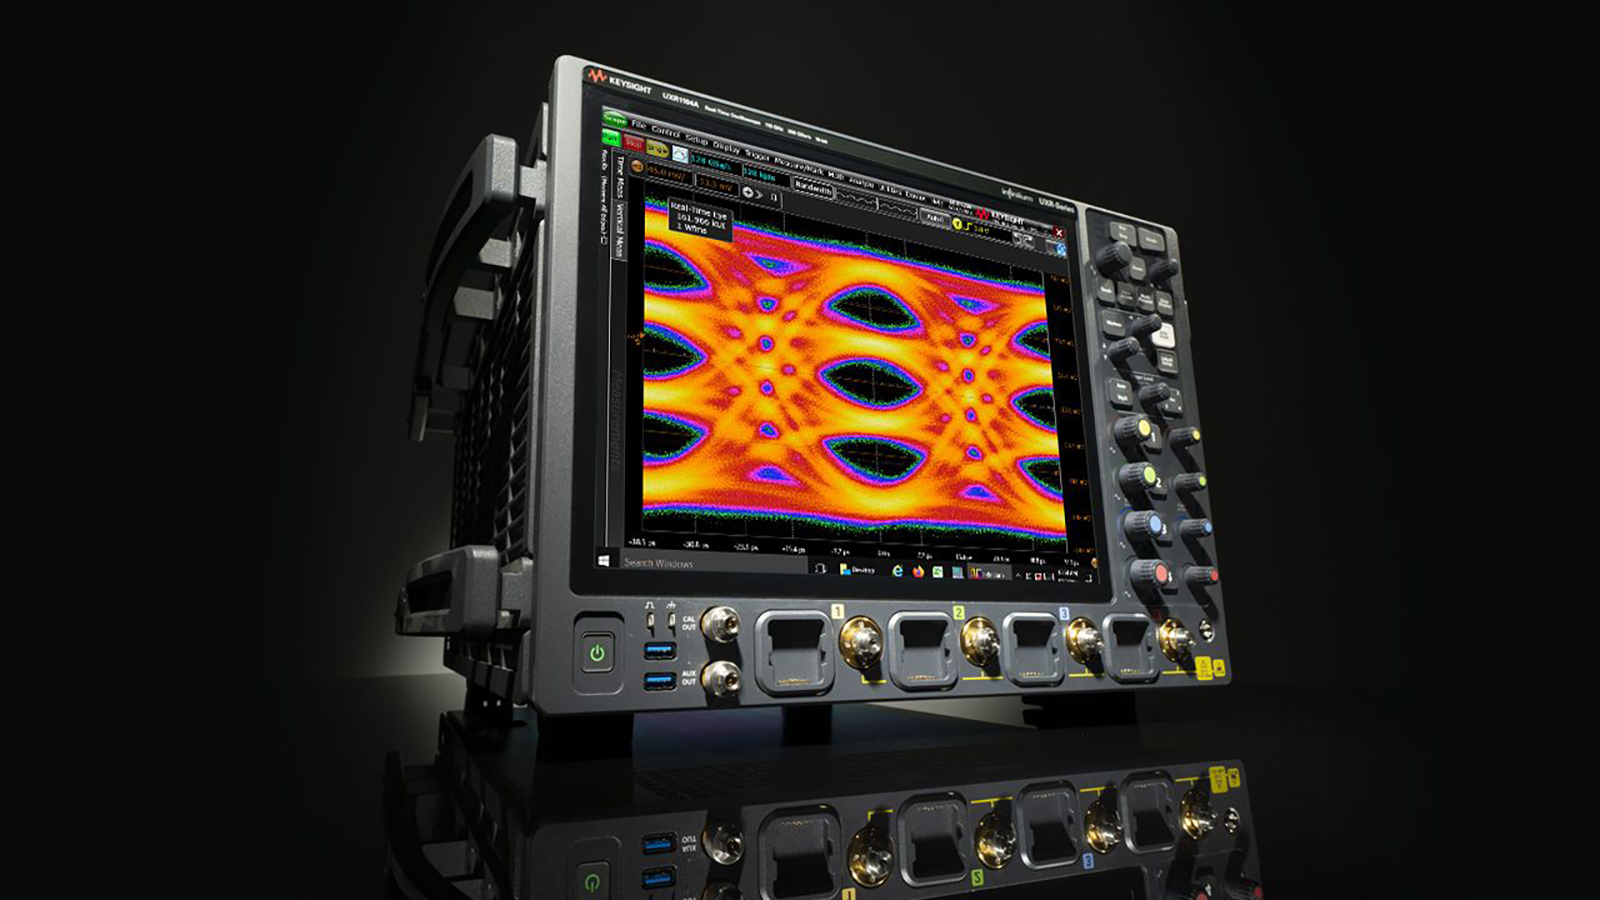 Keysight: Design, Emulate, and Test to Accelerate Innovation